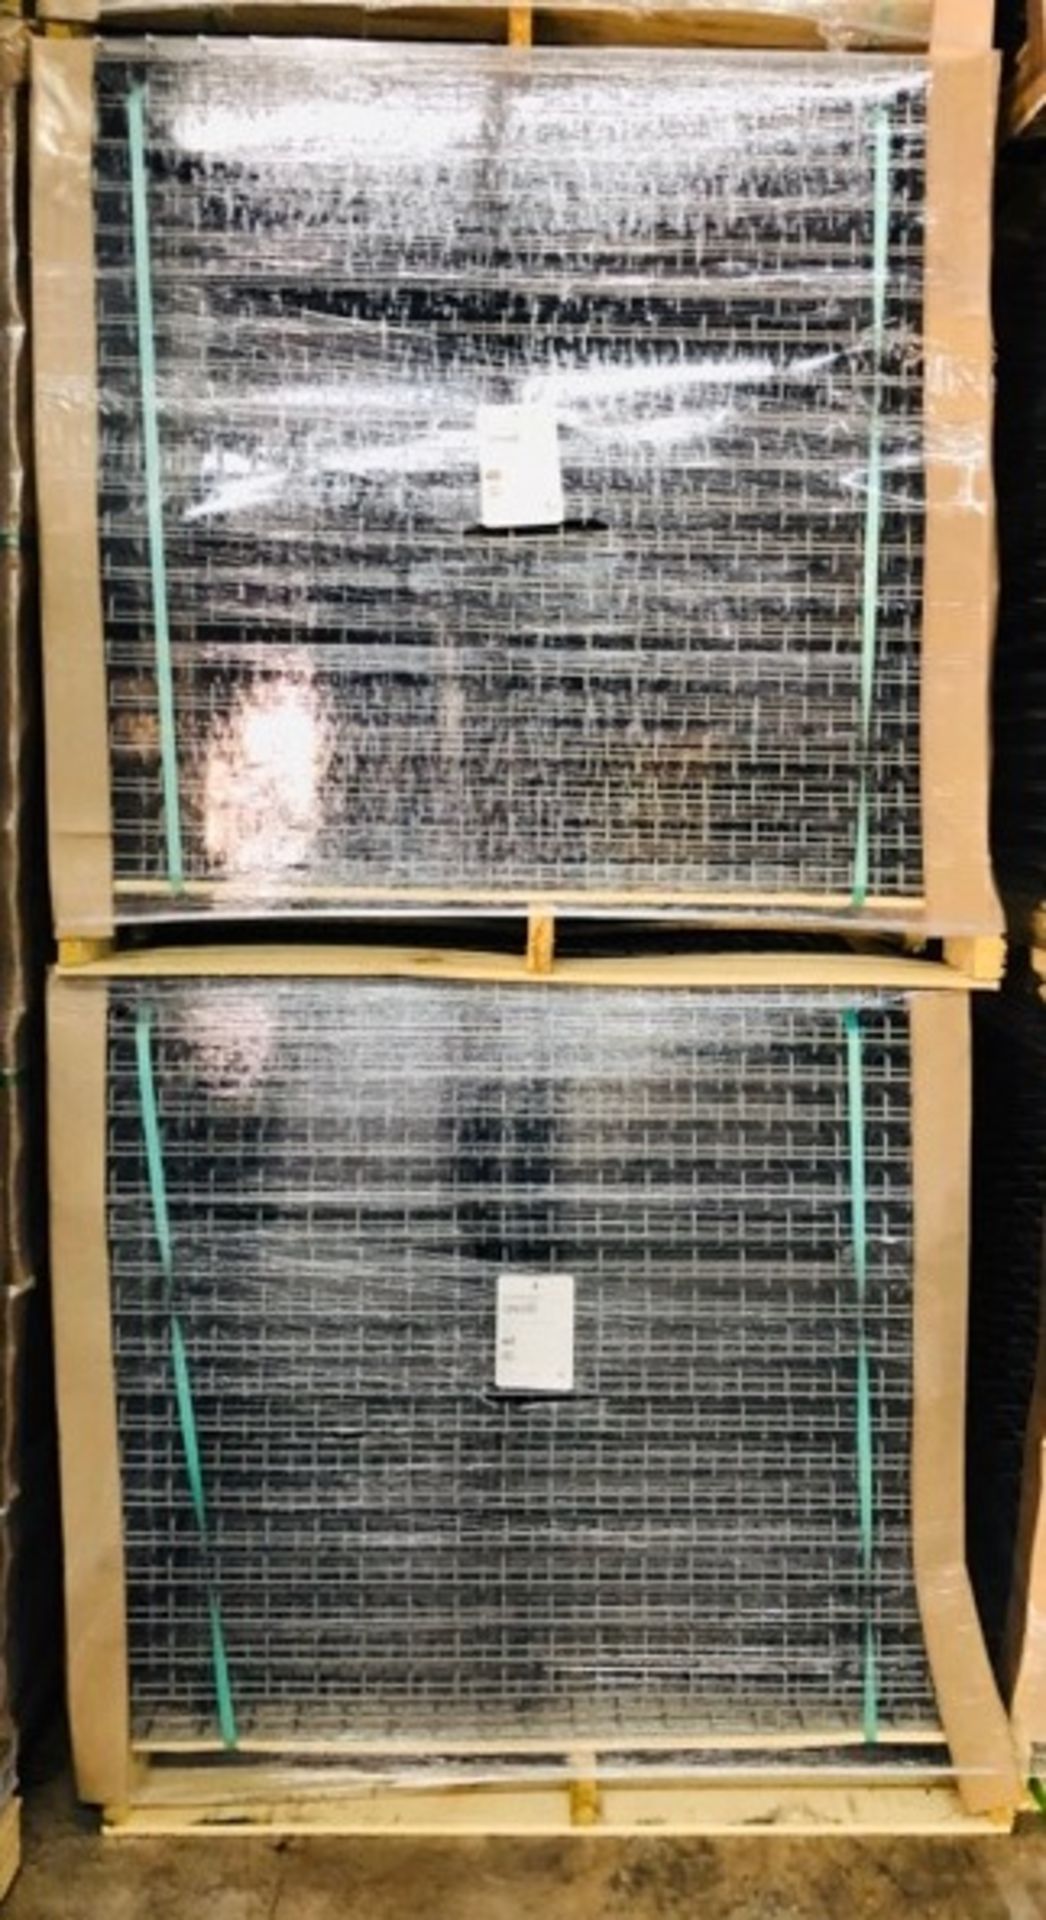 NEW 120 PCS OF STANDARD 48" X 46" WIREDECK - 1900 LBS CAPACITY